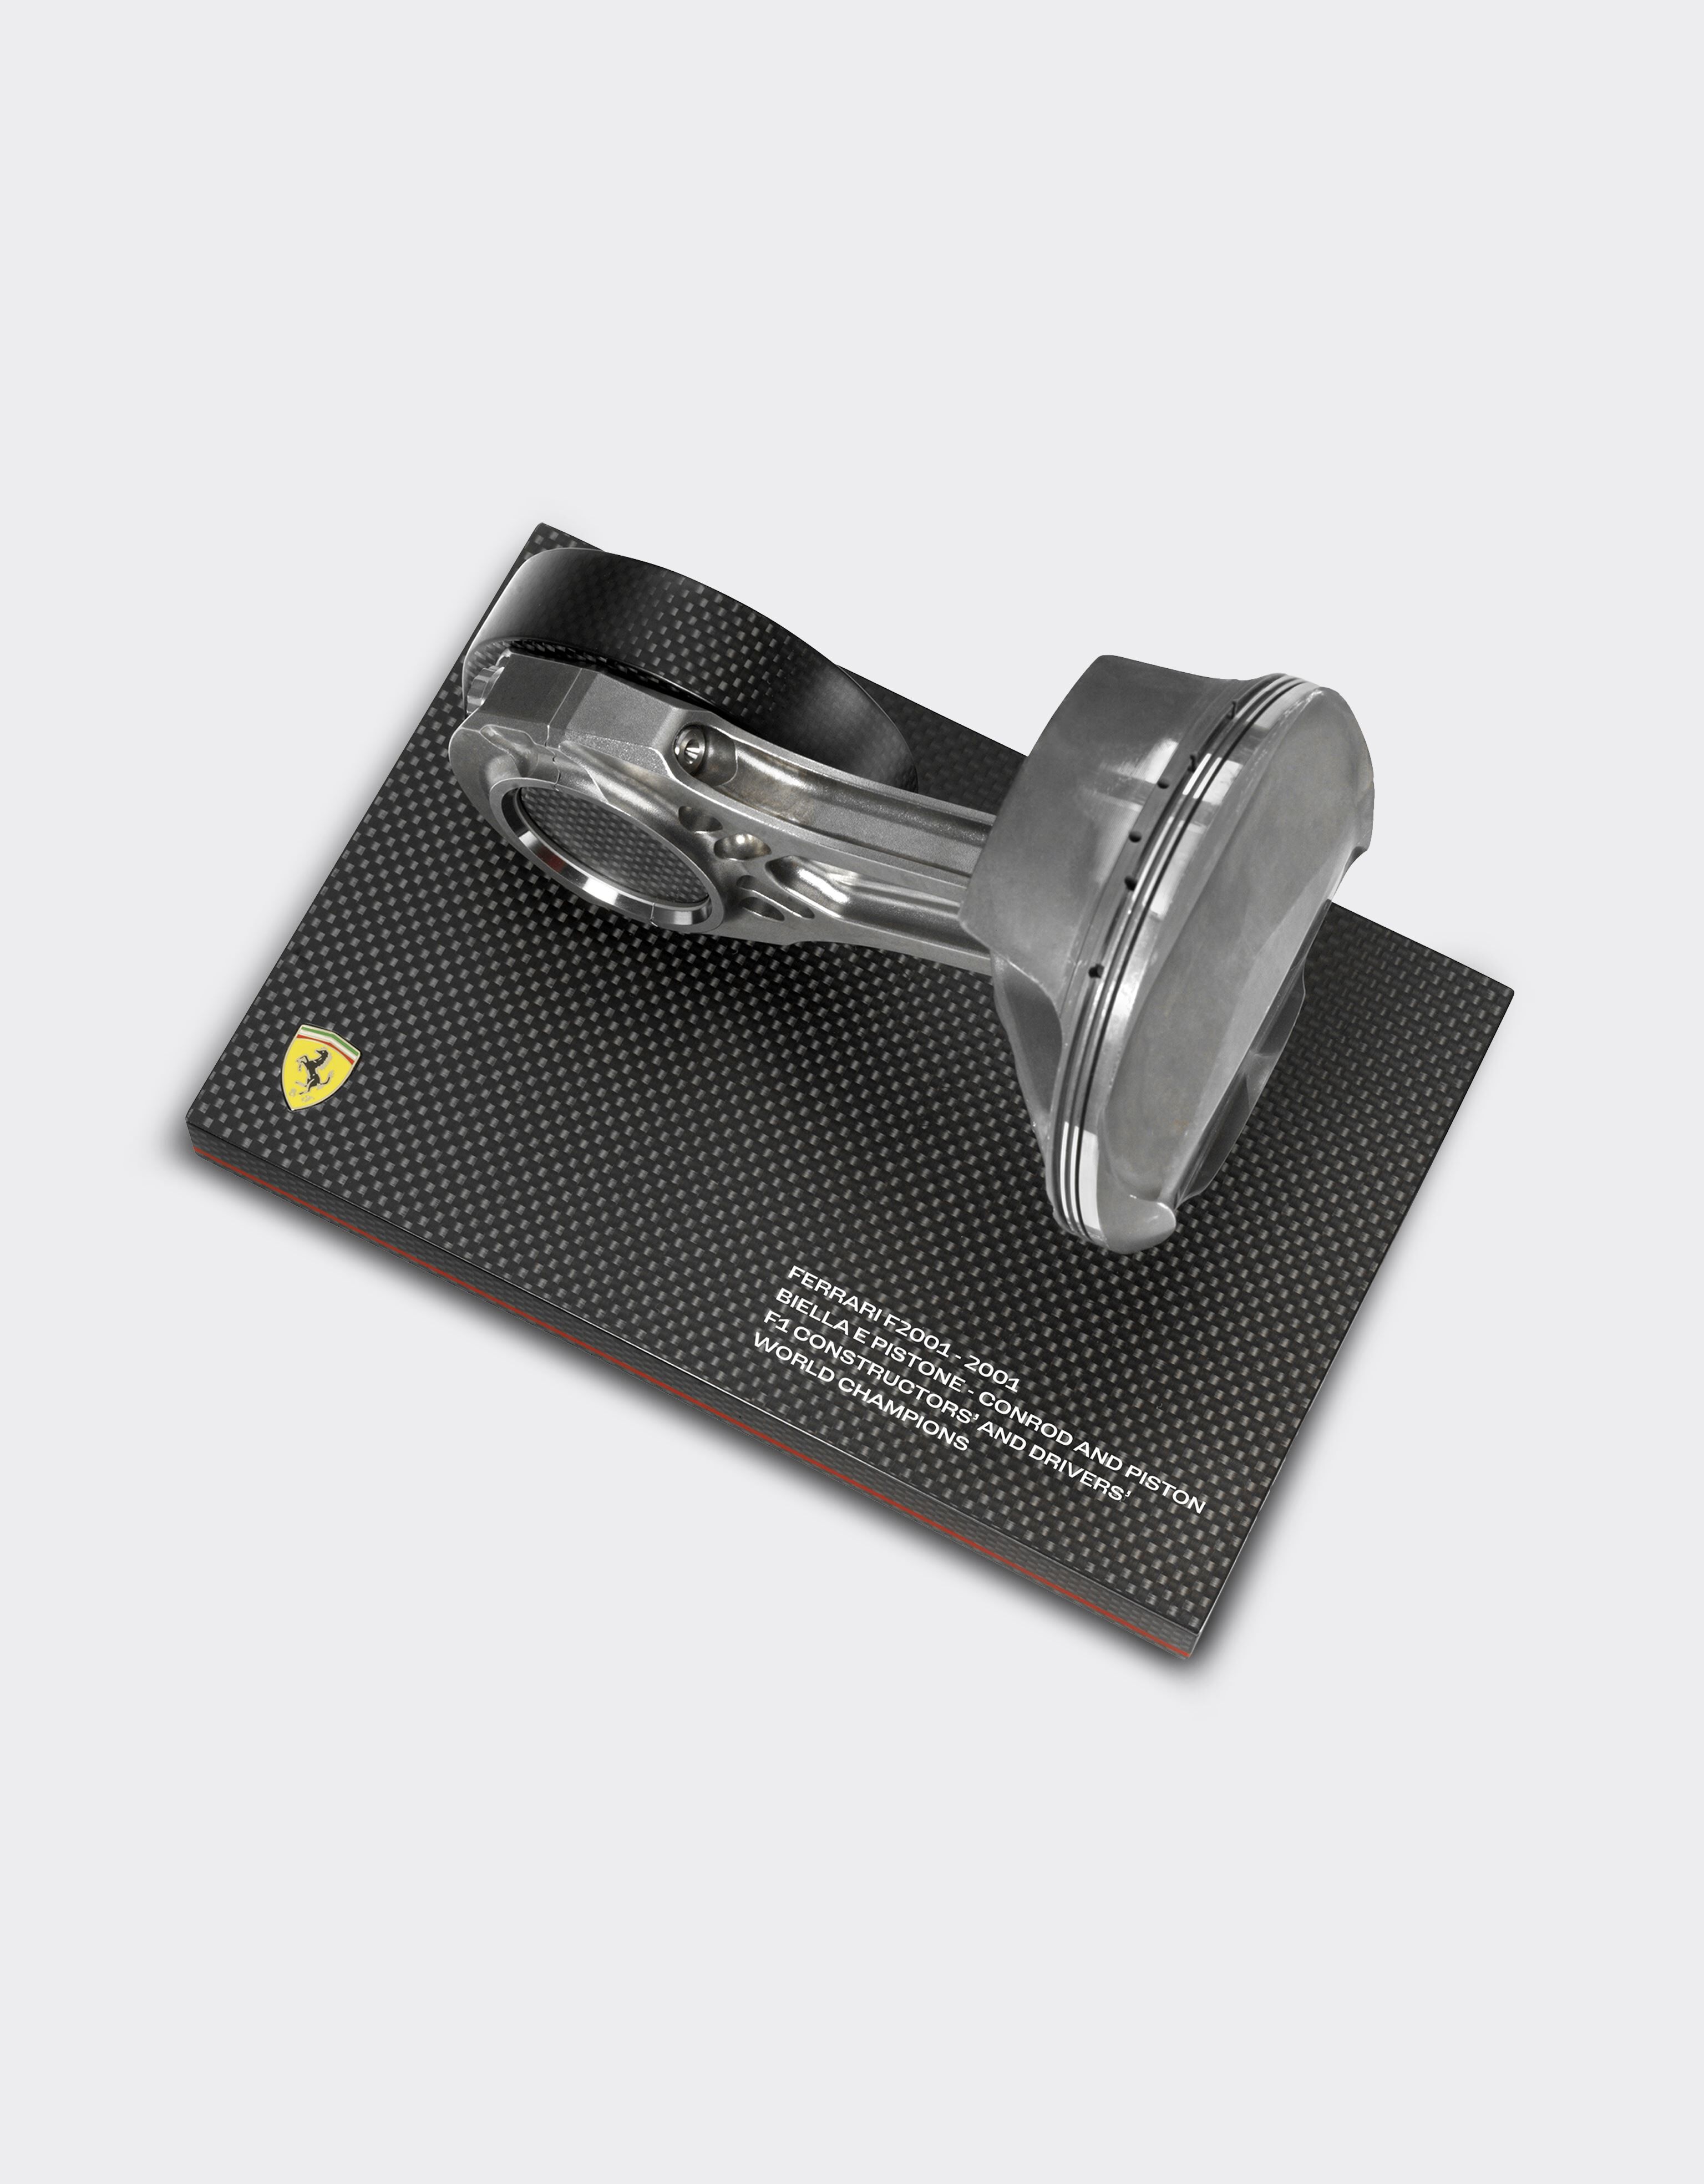 ${brand} Original connecting rod and piston set from the F2001, winner of the 2001 Constructors' and Drivers' Championships ${colorDescription} ${masterID}